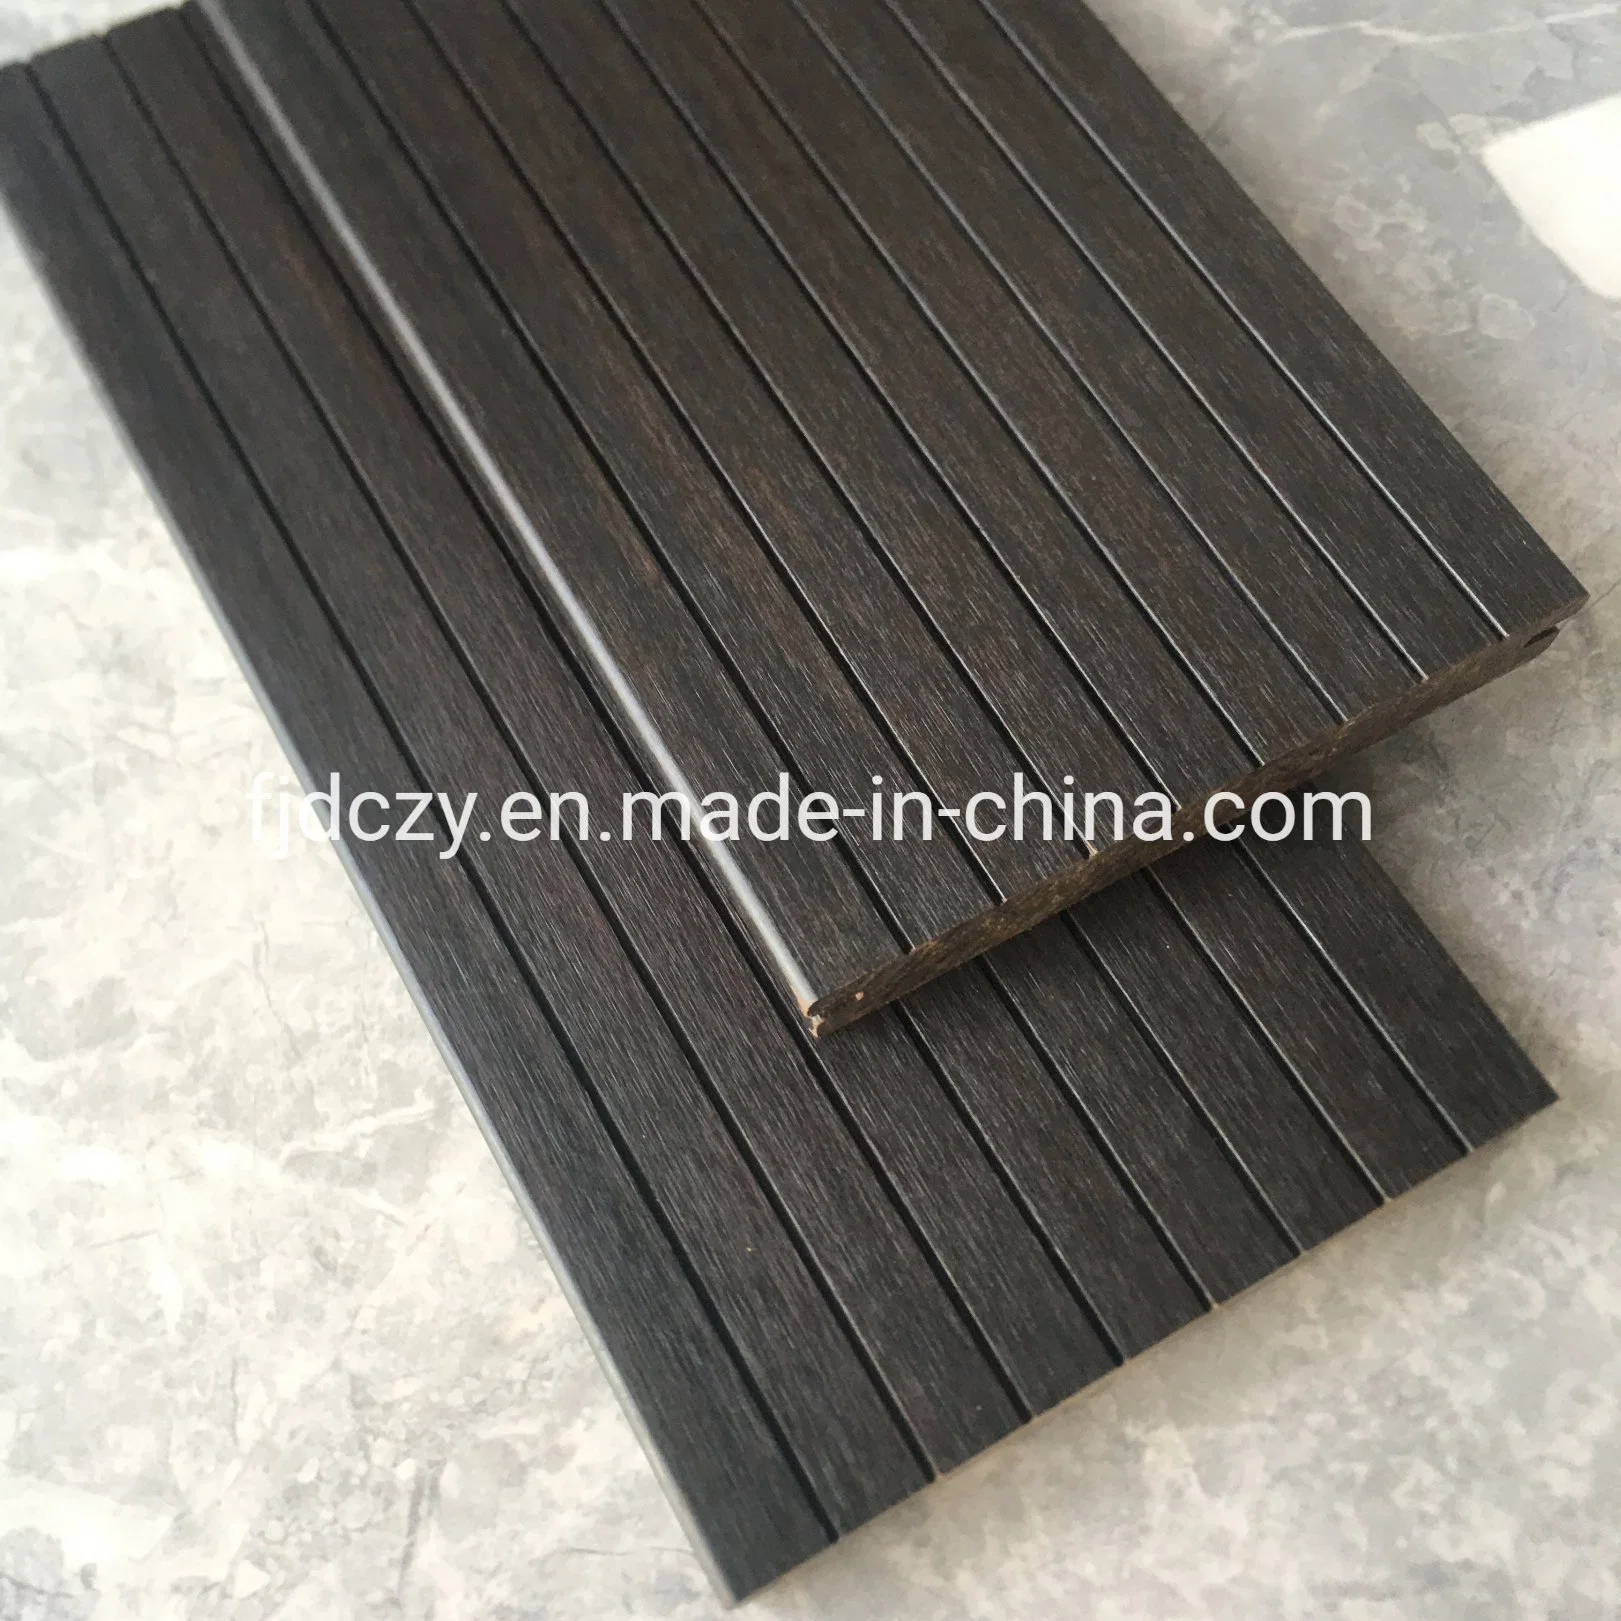 Decorative Wall Panel Carbon Bamboo Terrace Floor Wall Tile